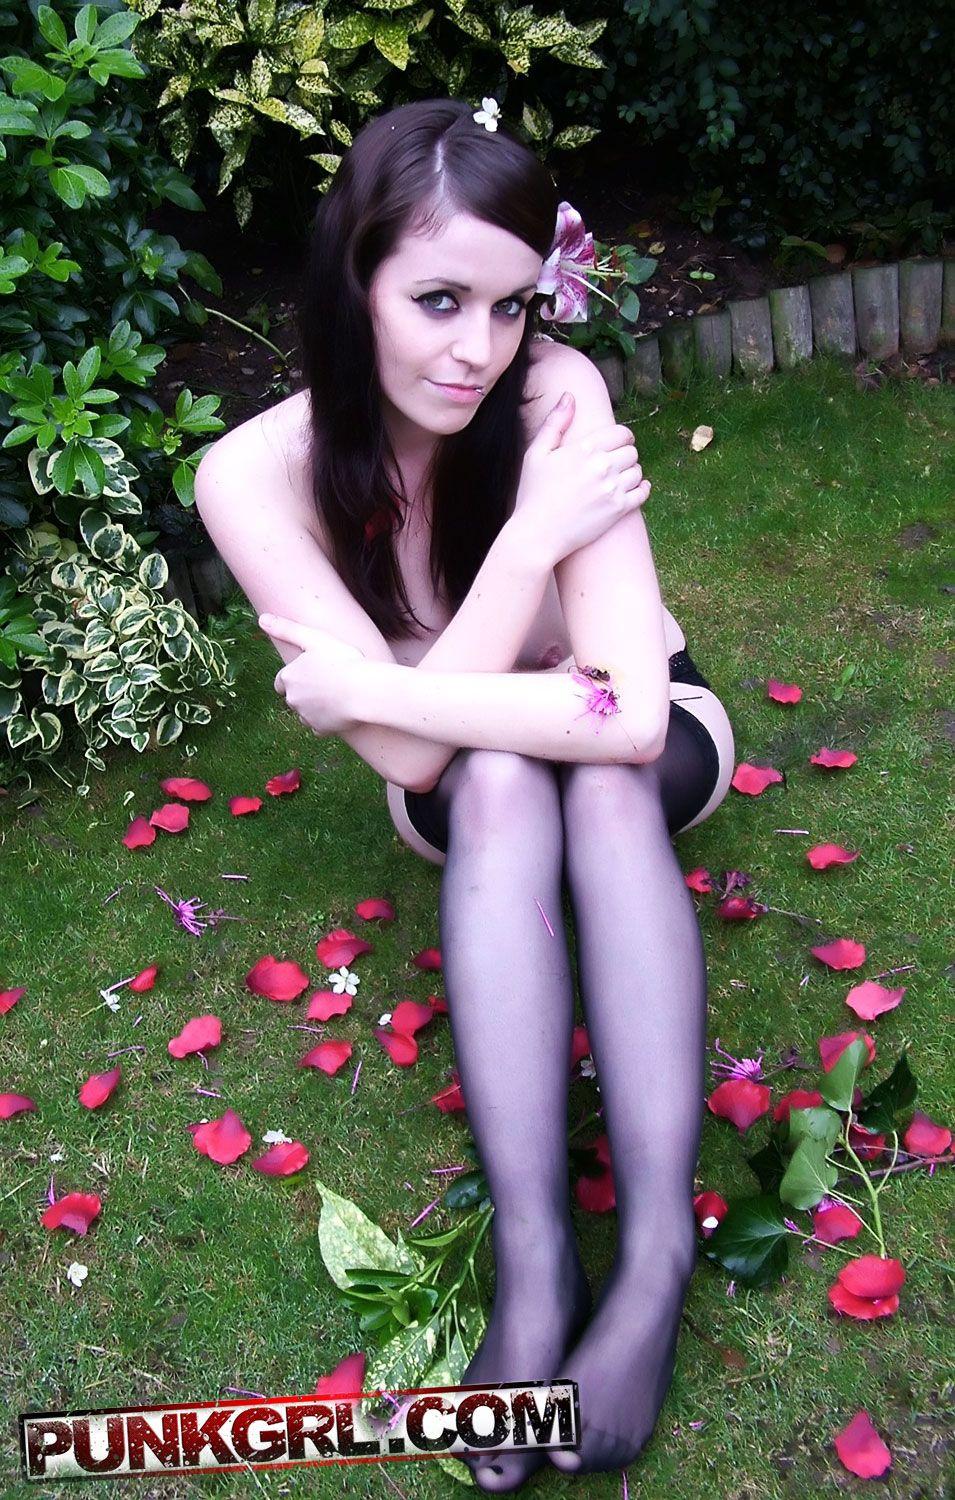 Pictures of punk teen Betty showing her beauty in the garden #60764201